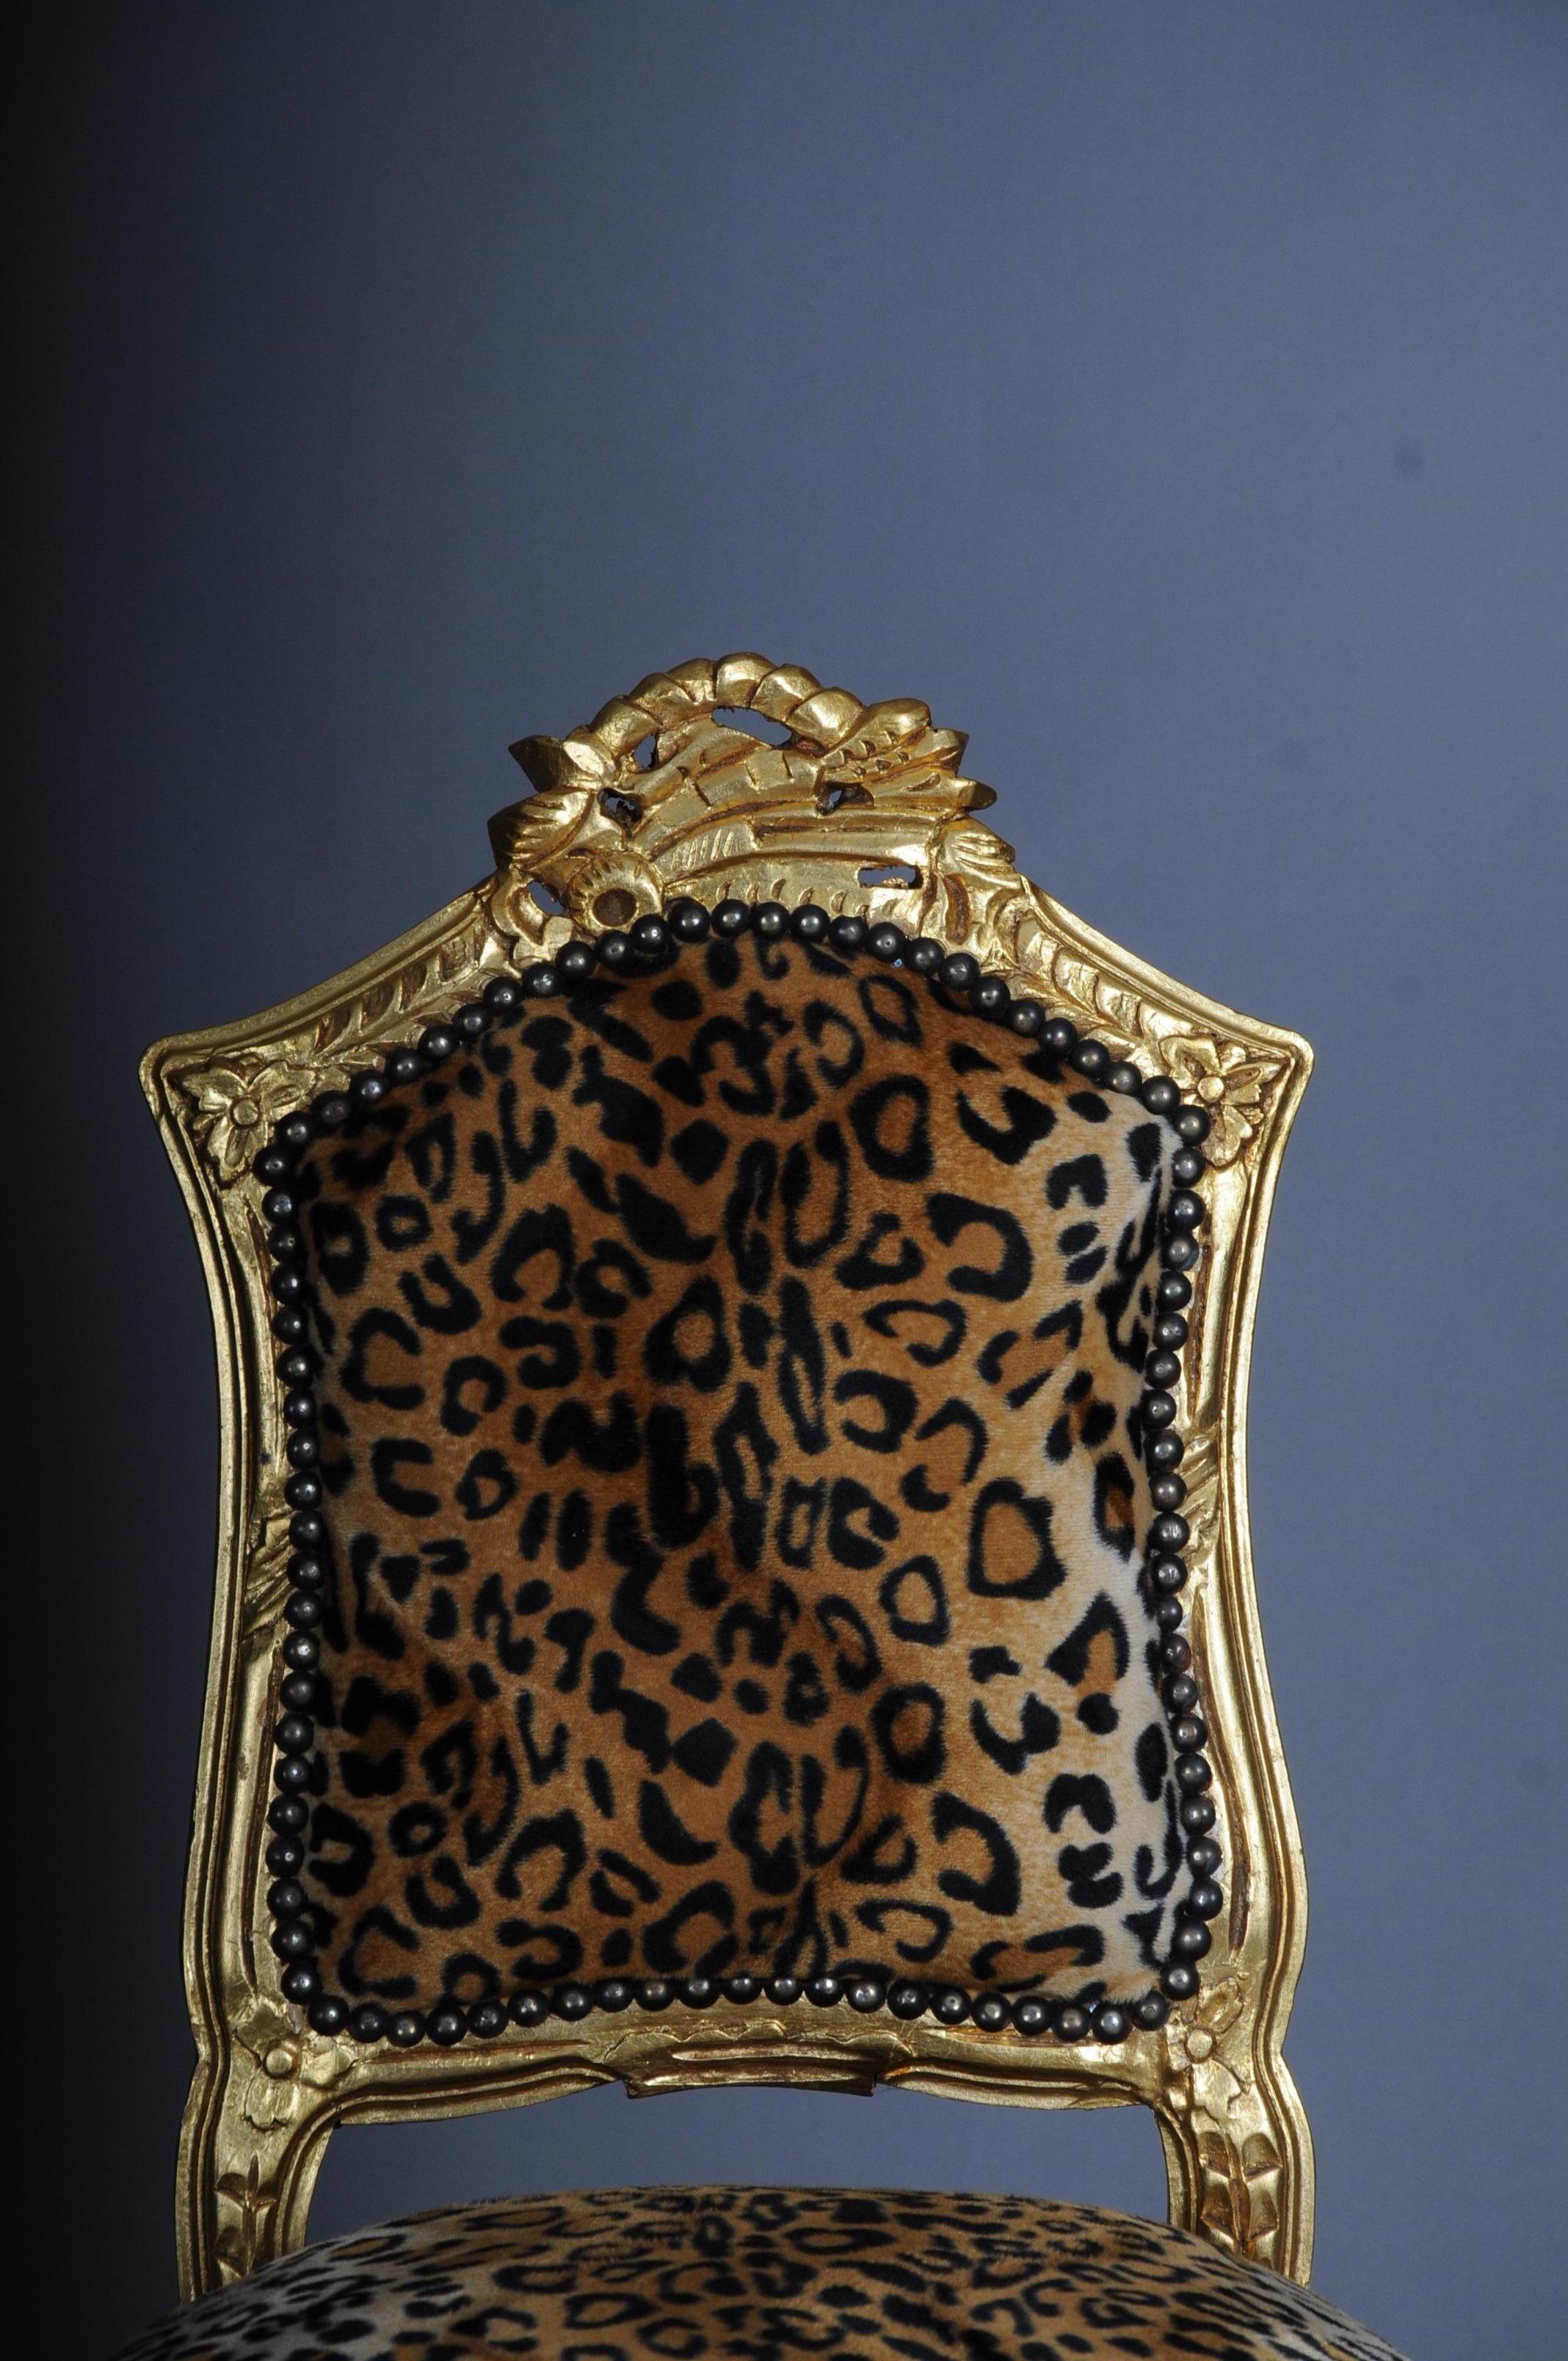 20th century Fancy chair in Louis XV style, velvet leopard

Solid wood and gold frame. Bombed and carved frame on curved feet. Leopard velvet fabric cover.

(C-Mu-1).